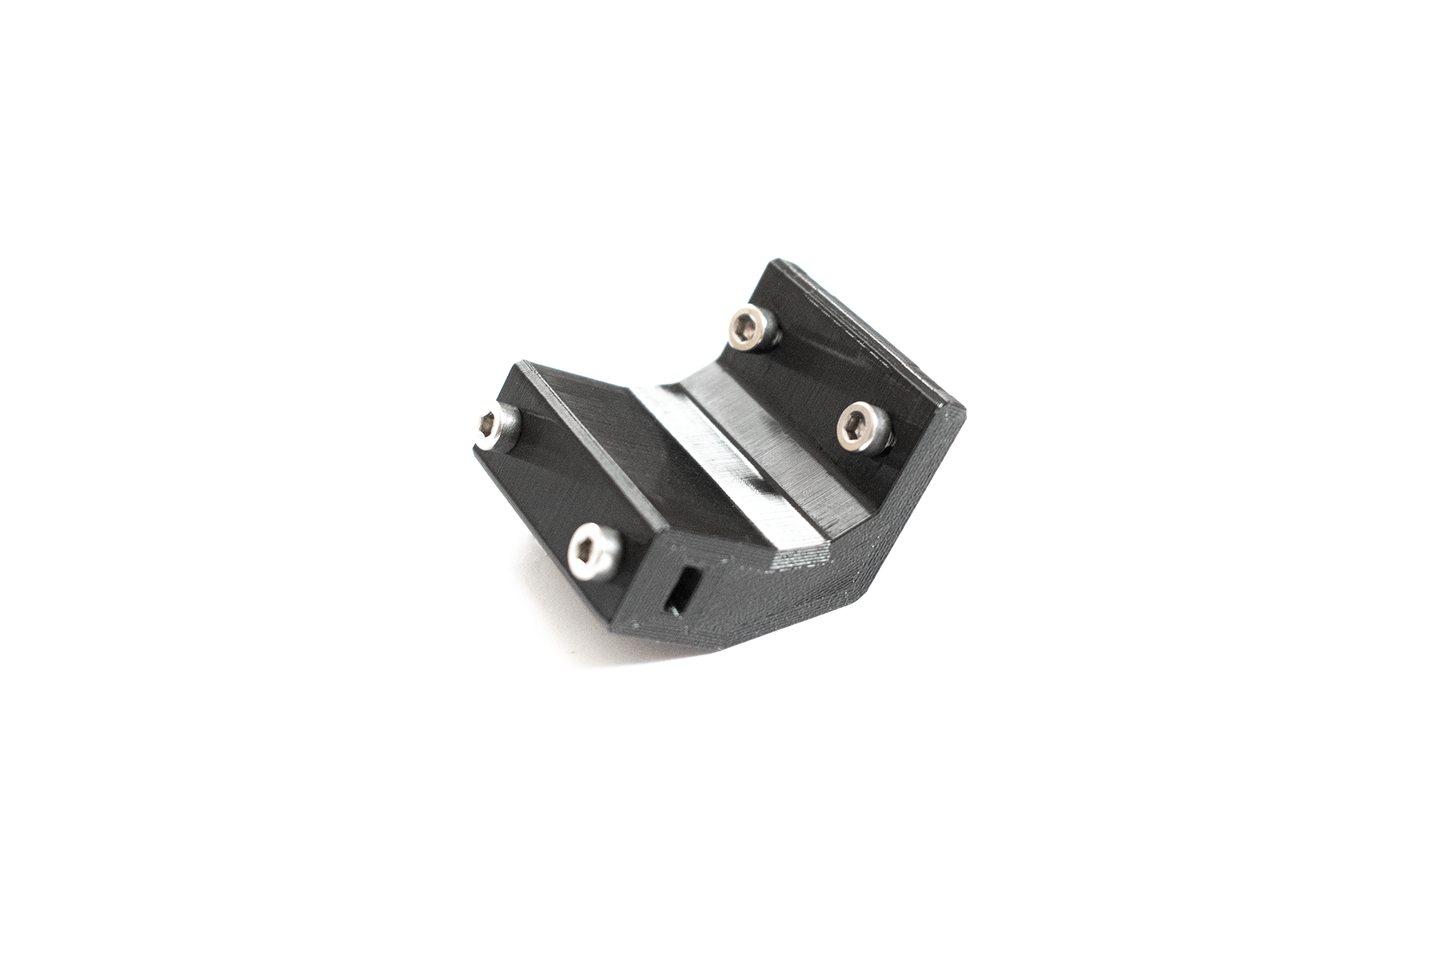 Paddle spacer for Thrustmaster TS-PC/TS-XW